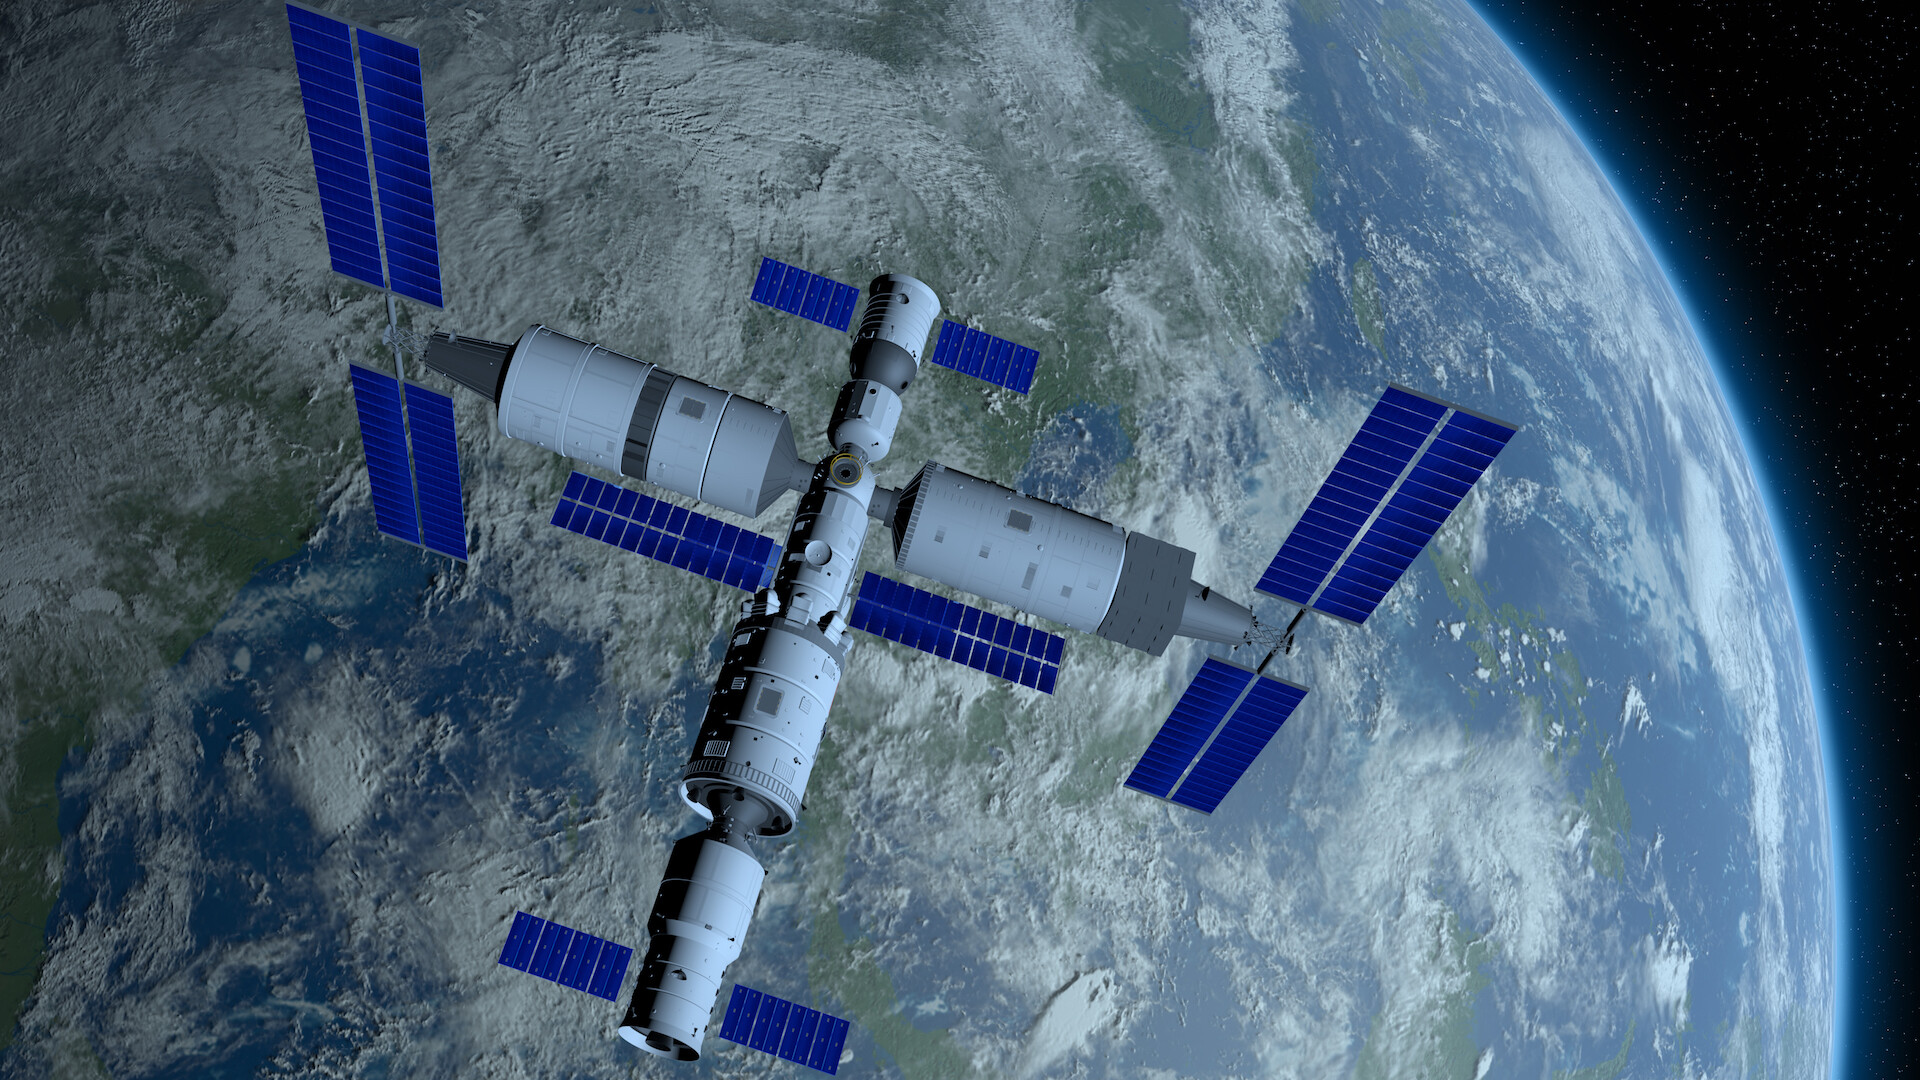 Tiangong Space Station: The core of the "Third Step" of the China Manned Space Program. 1920x1080 Full HD Background.